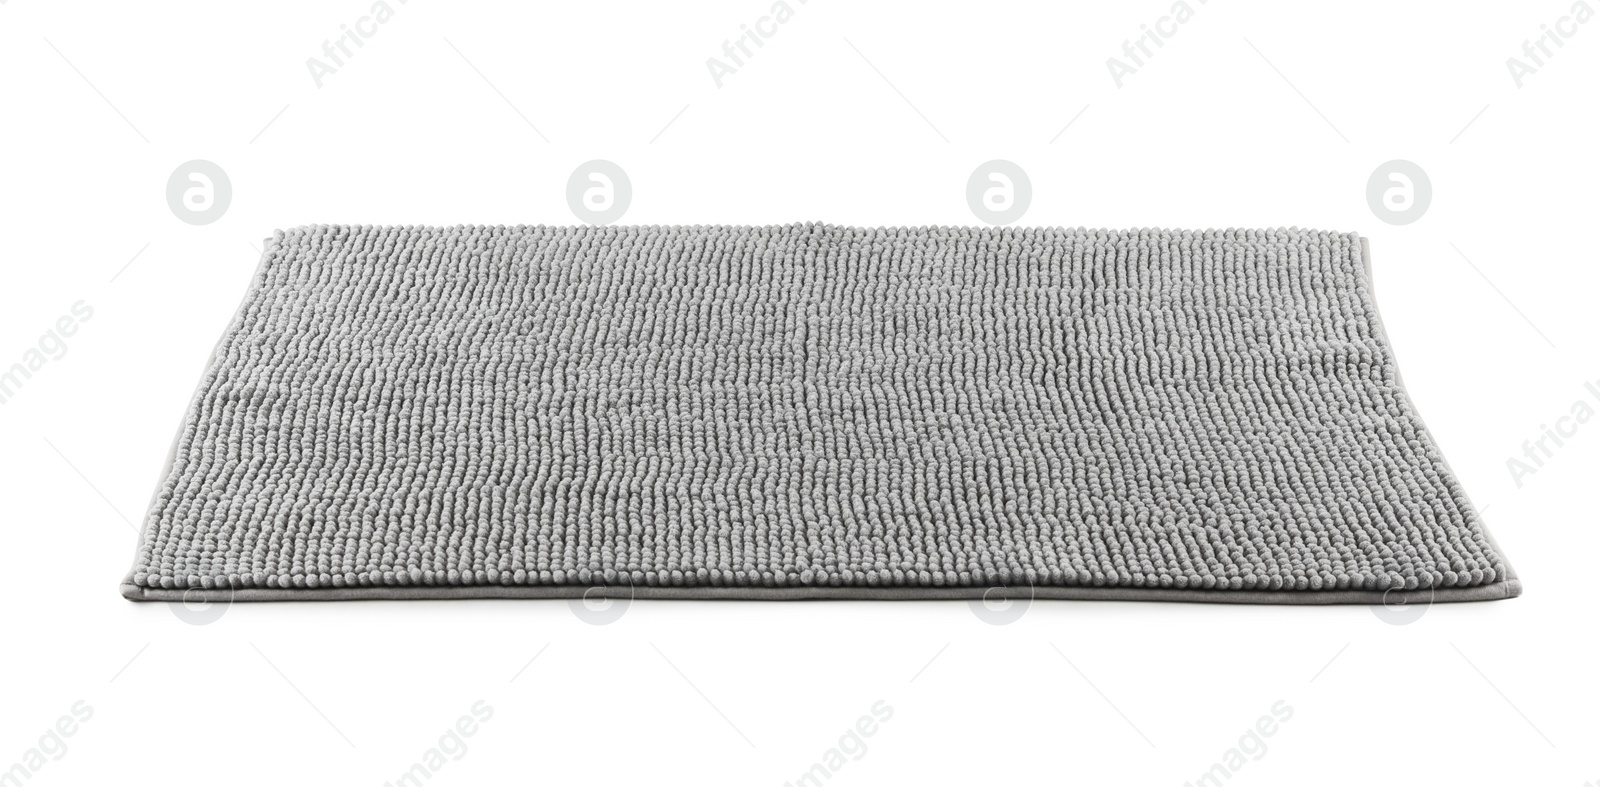 Photo of New grey bath mat isolated on white